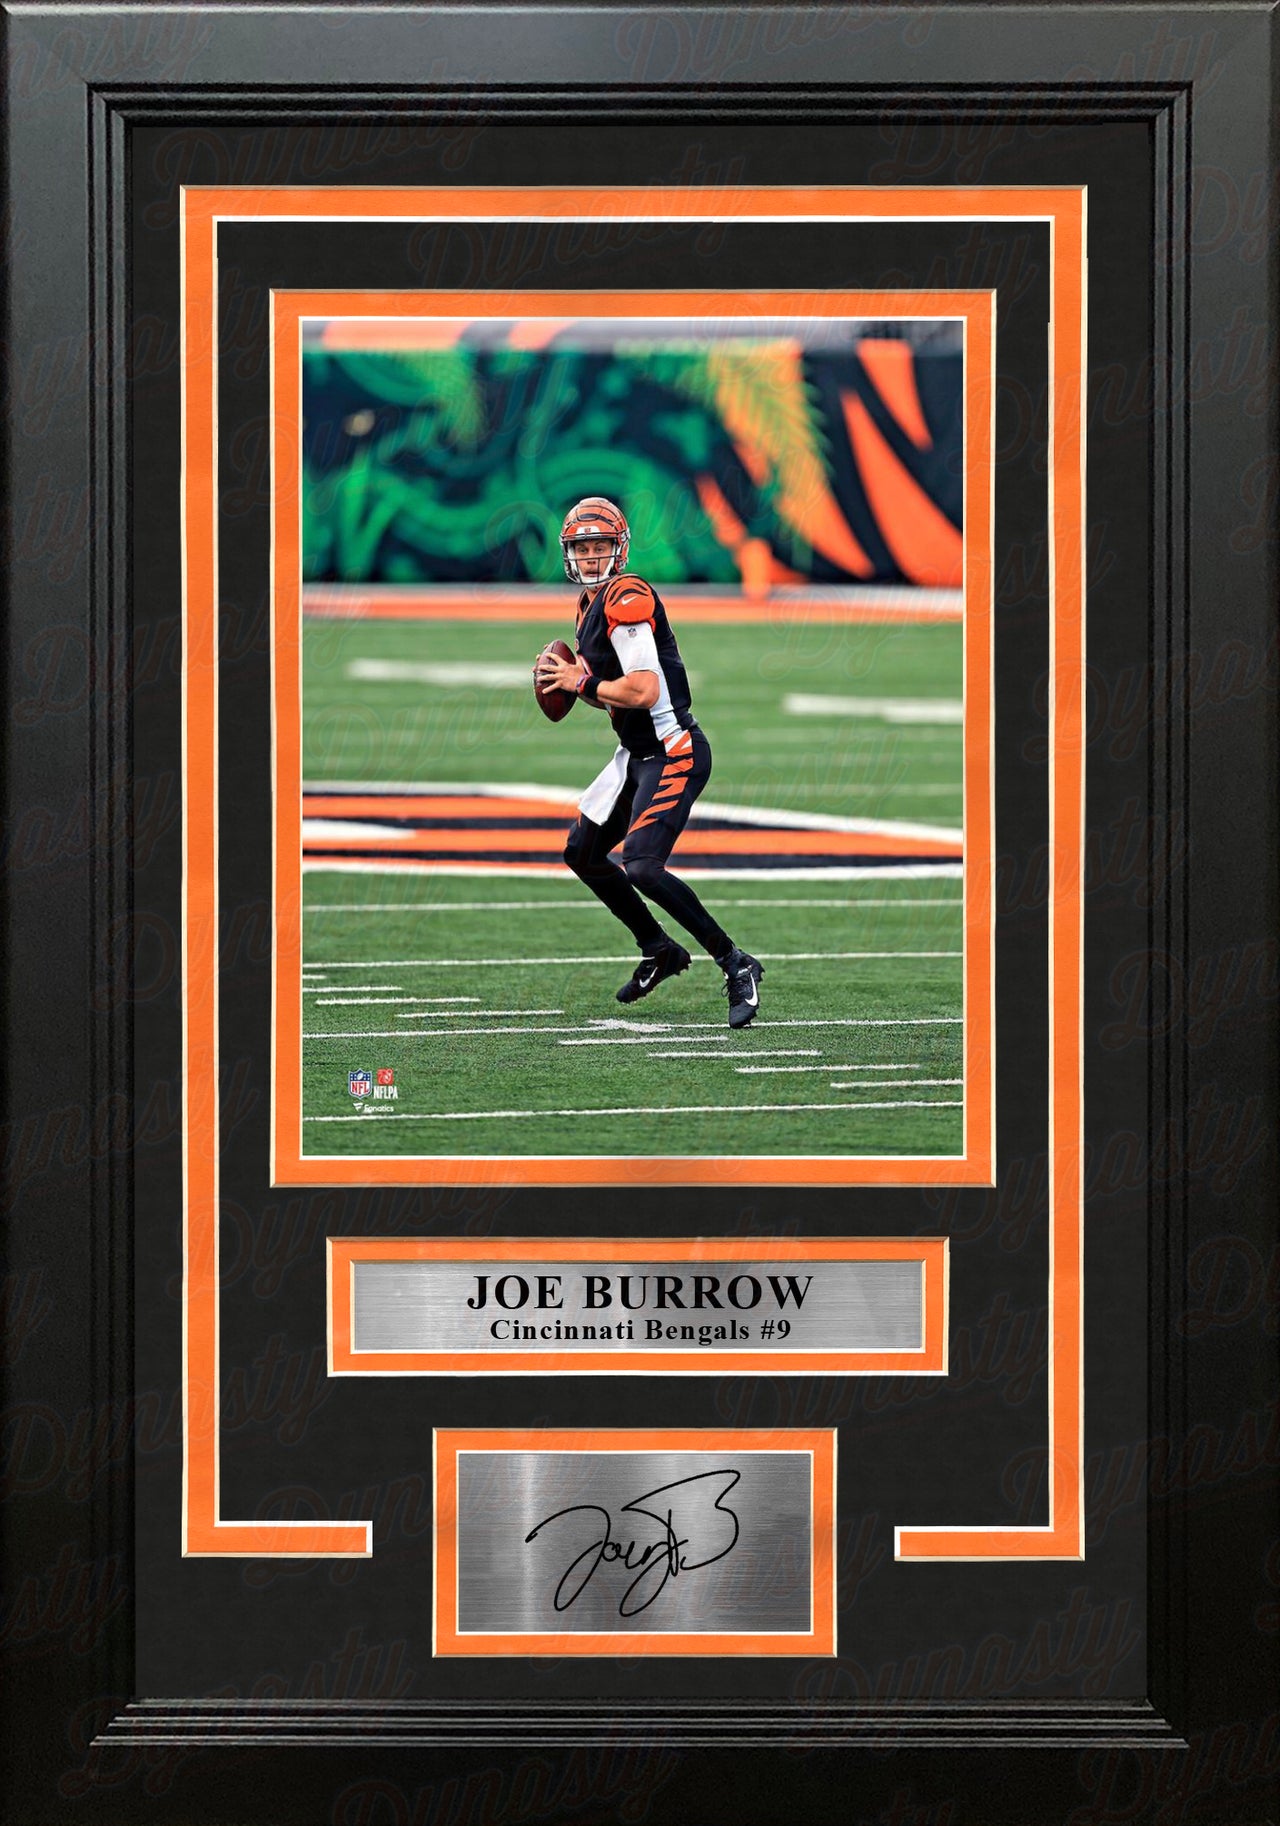 Joe Burrow in Action Cincinnati Bengals 8" x 10" Framed Football Photo with Engraved Autograph - Dynasty Sports & Framing 